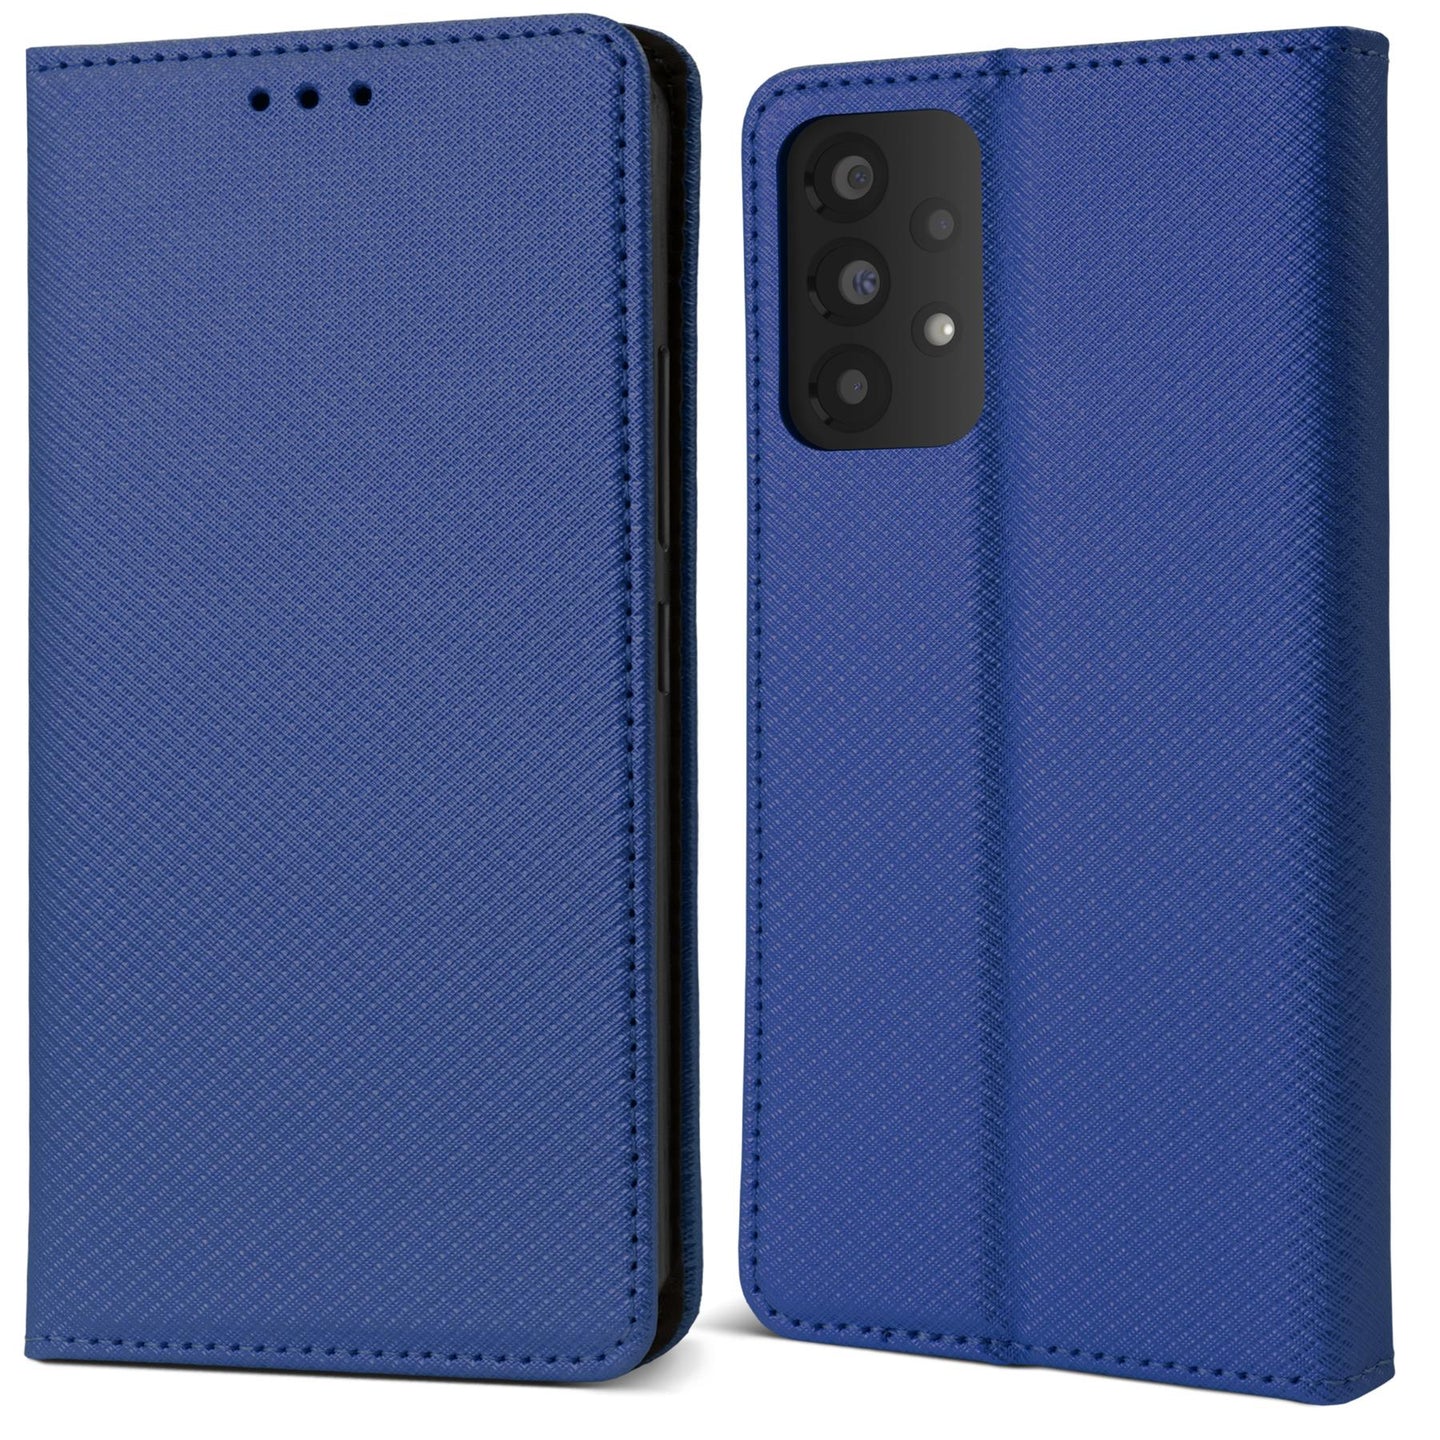 Moozy Case Flip Cover for Samsung A53 5G, Dark Blue - Smart Magnetic Flip Case Flip Folio Wallet Case with Card Holder and Stand, Credit Card Slots, Kickstand Function